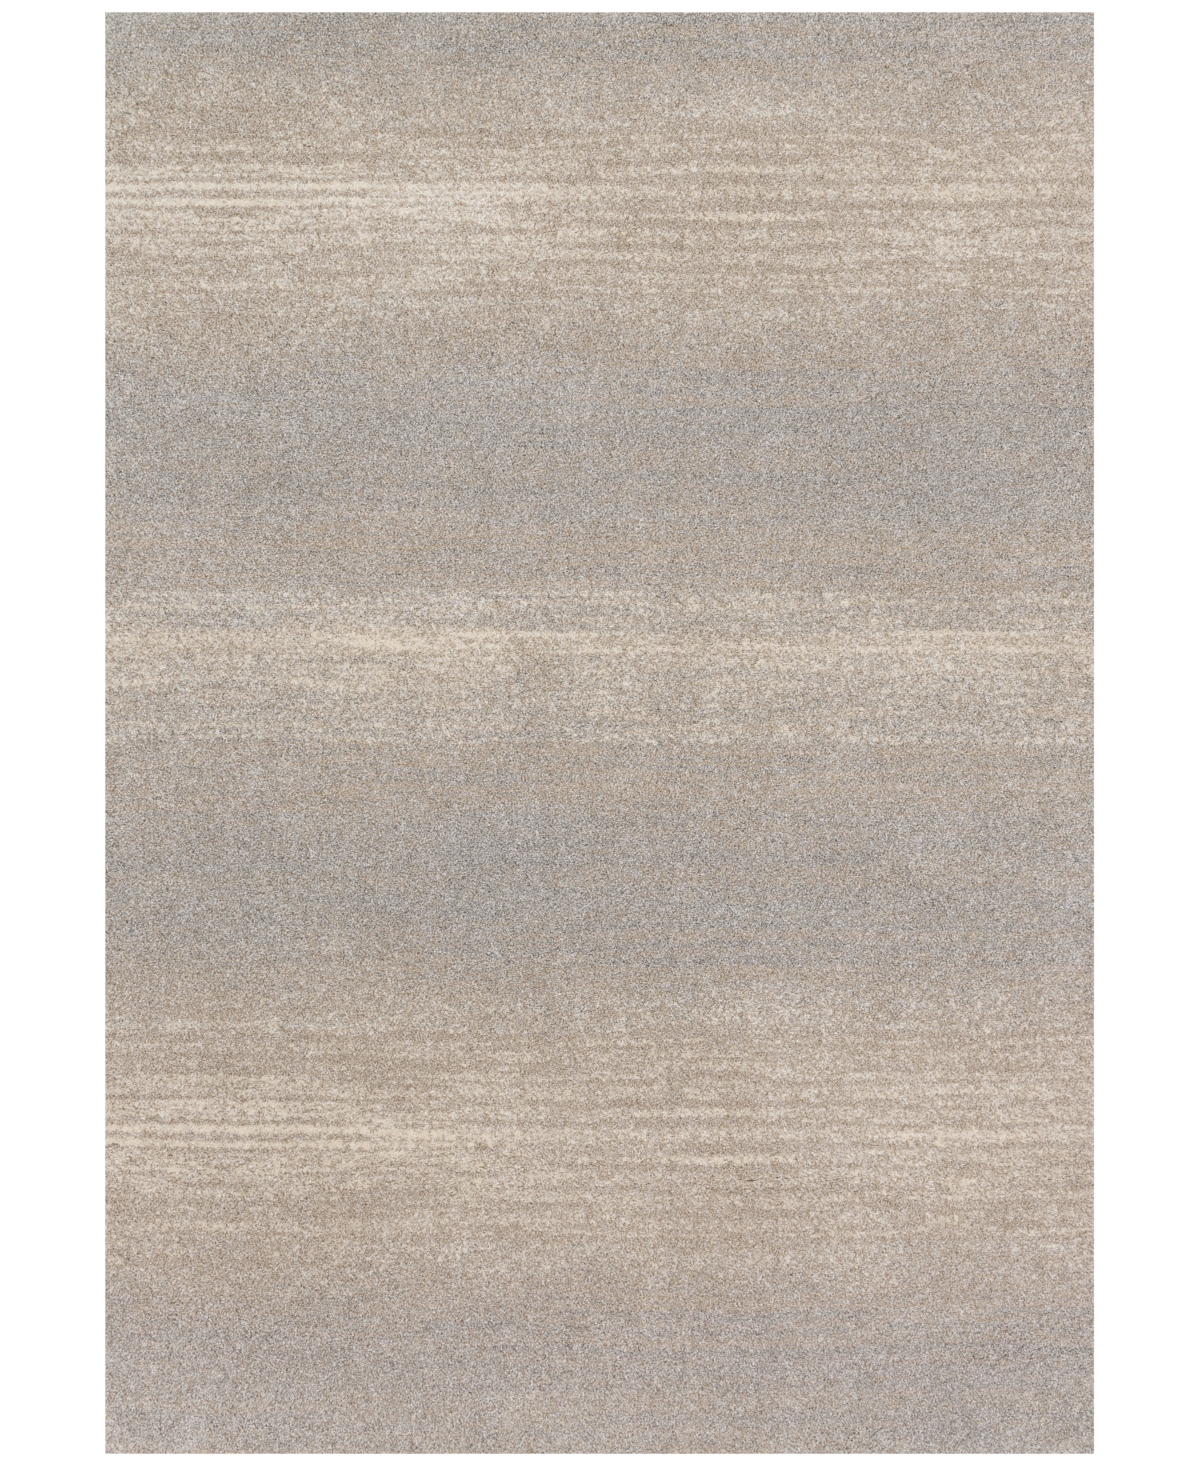 Loloi Emory Eb-03 Silver 7'7in x 10'6in Area Rug